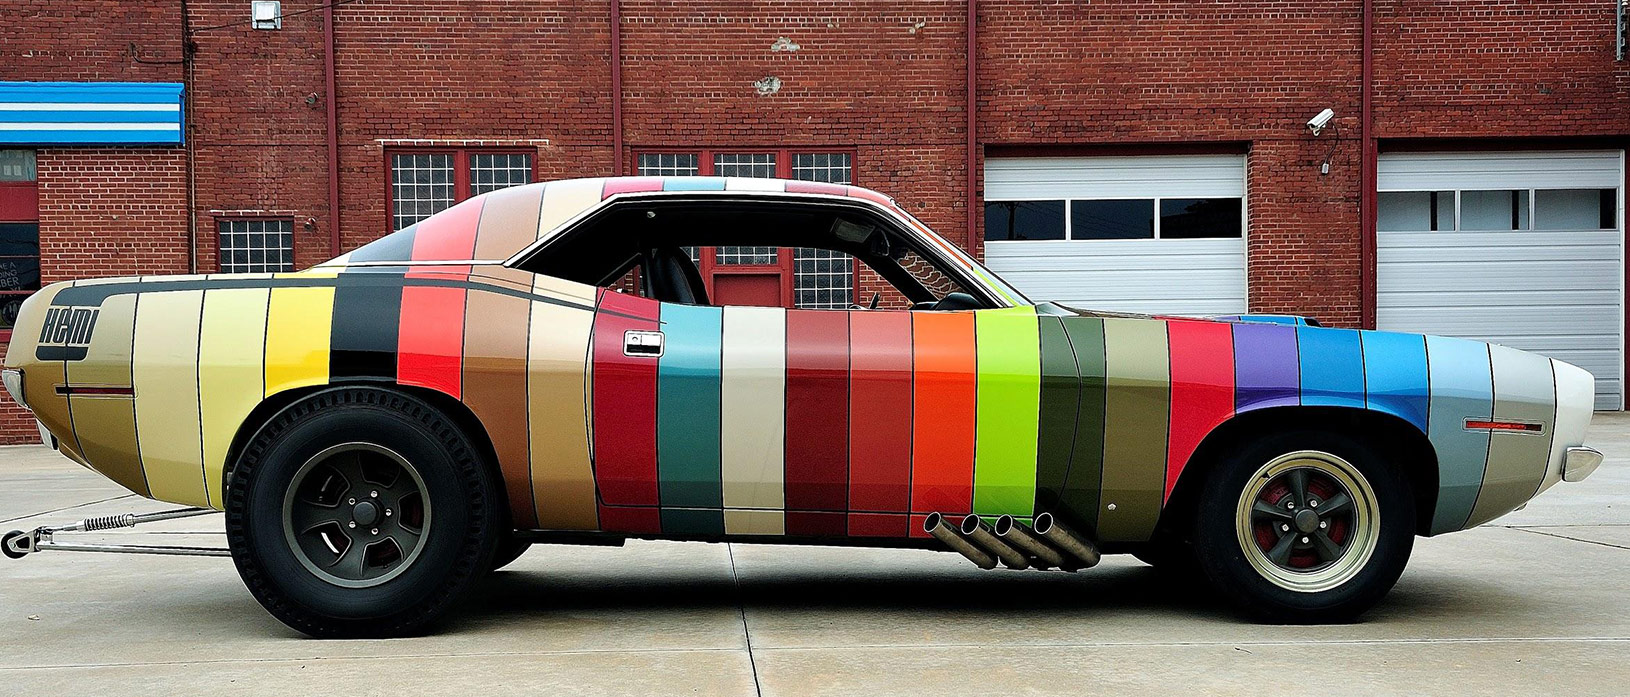 Dodge Challenger painted in stripes of heritage colors